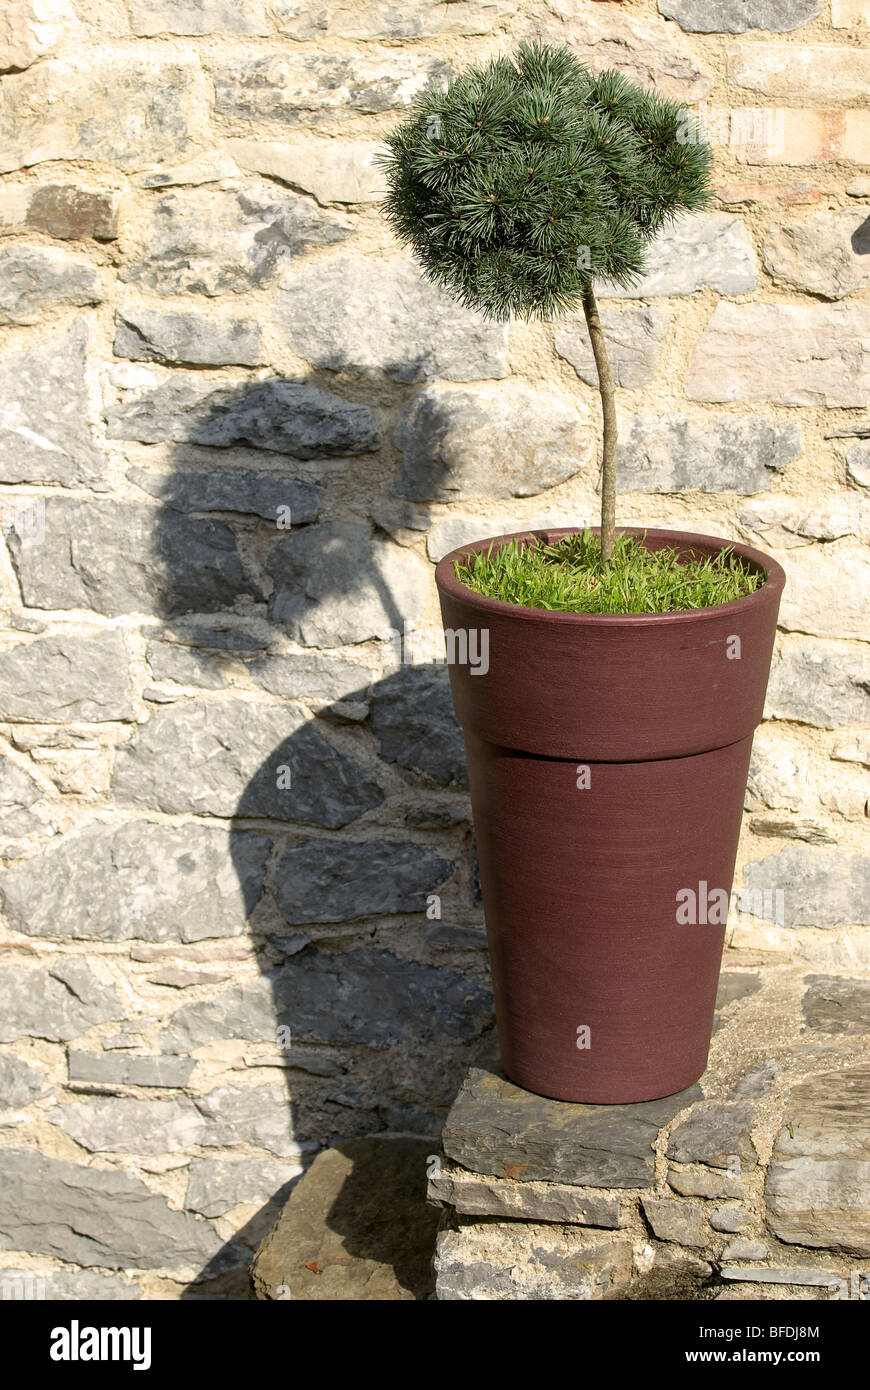 Pinus Sylvestris in a large container on stone steps Stock Photo